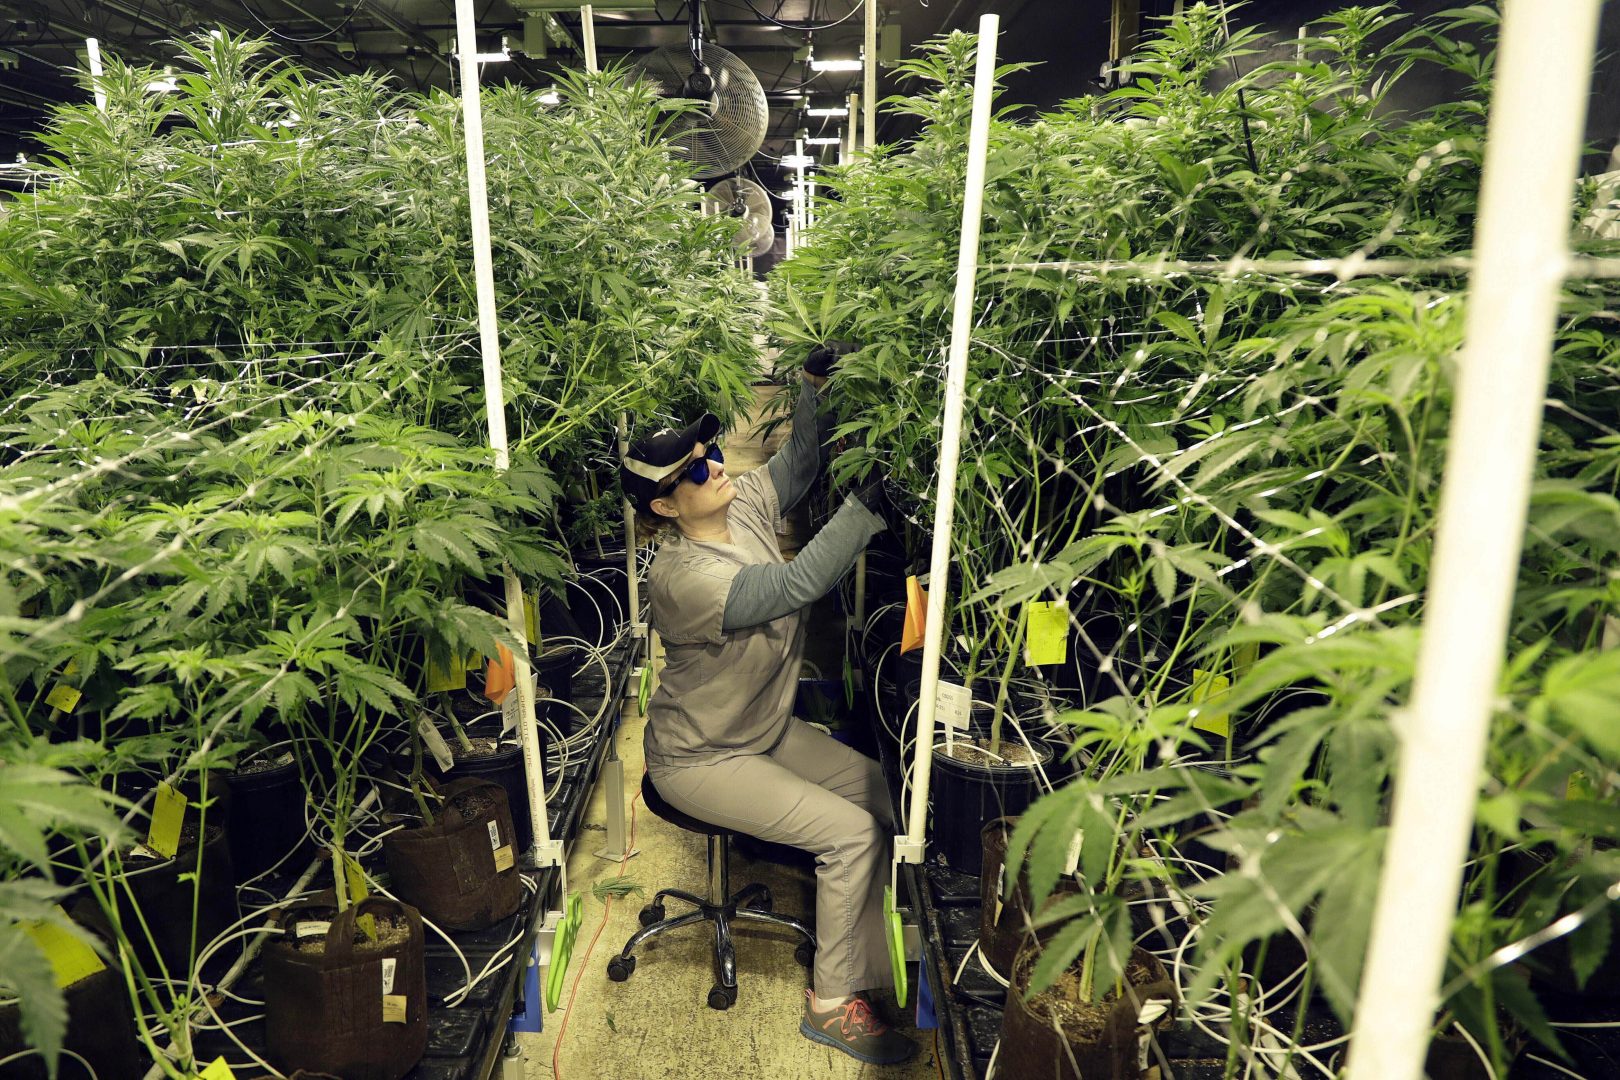 FILE - Heather Randazzo, a grow employee at Compassionate Care Foundation's medical marijuana dispensary, trims leaves off marijuana plants in the company's grow house in Egg Harbor Township, N.J., March 22, 2019. Recreational marijuana sales in New Jersey for those 21 and older will begin April 21, 2022, Democratic Gov. Phil Murphy said Thursday, April 14. 